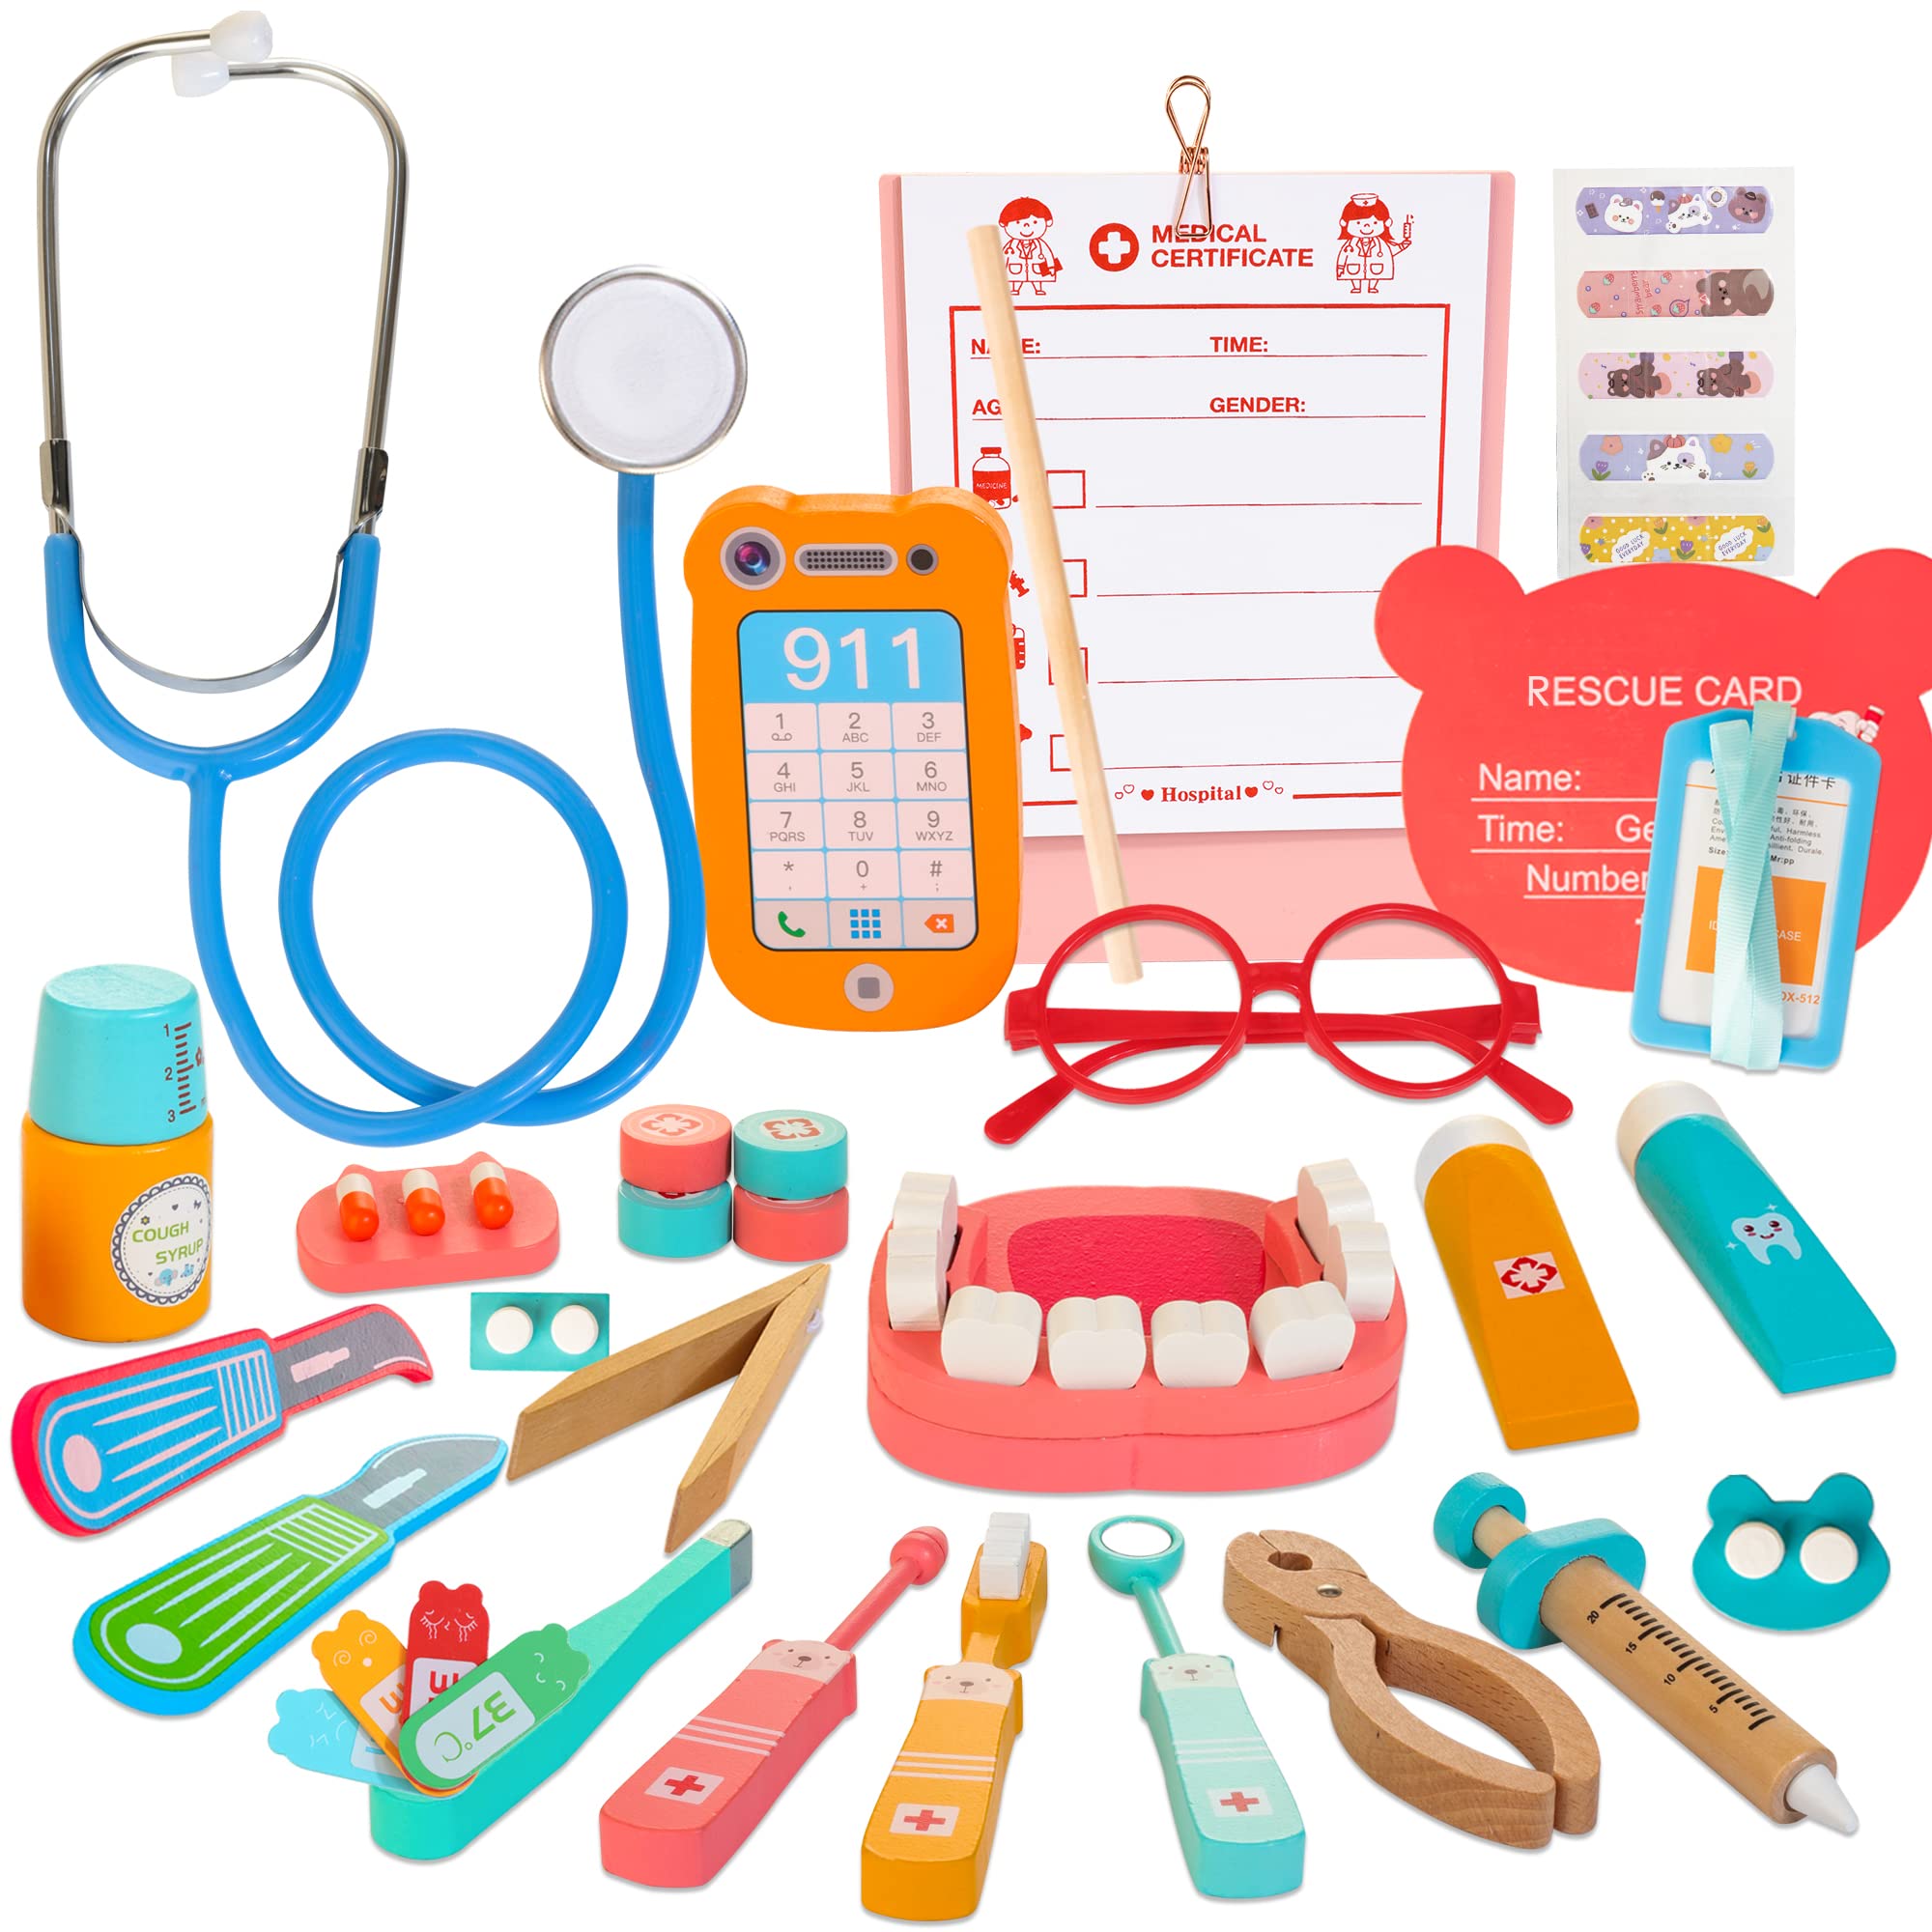 Lawcephun Wooden Dentist Kit for Kids, 41 Pieces Toy Medical Kit with Stethoscope & Medical Storage Bag, Montessori Pretend Doctor Kit Toy